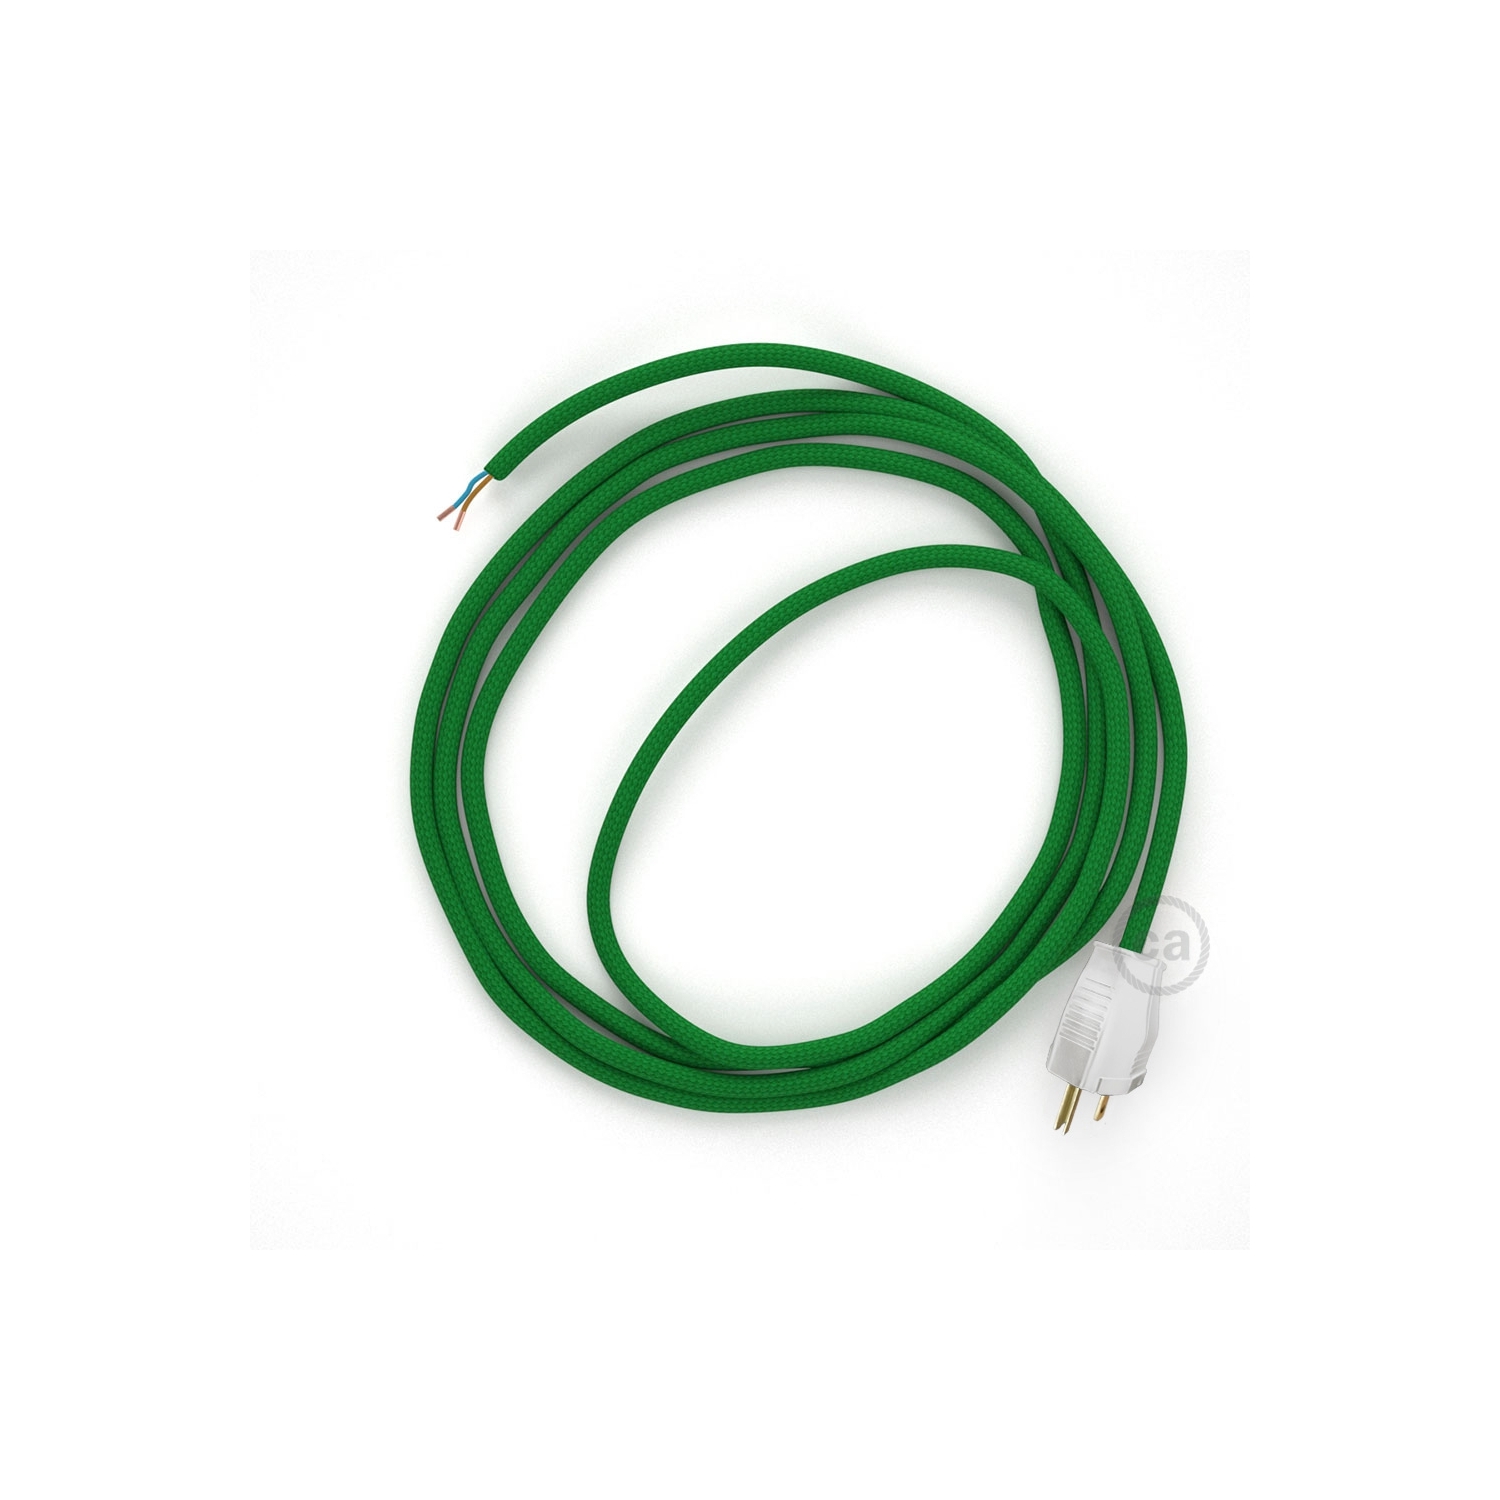 Cord-set - RM06 Green Rayon Covered Round Cable